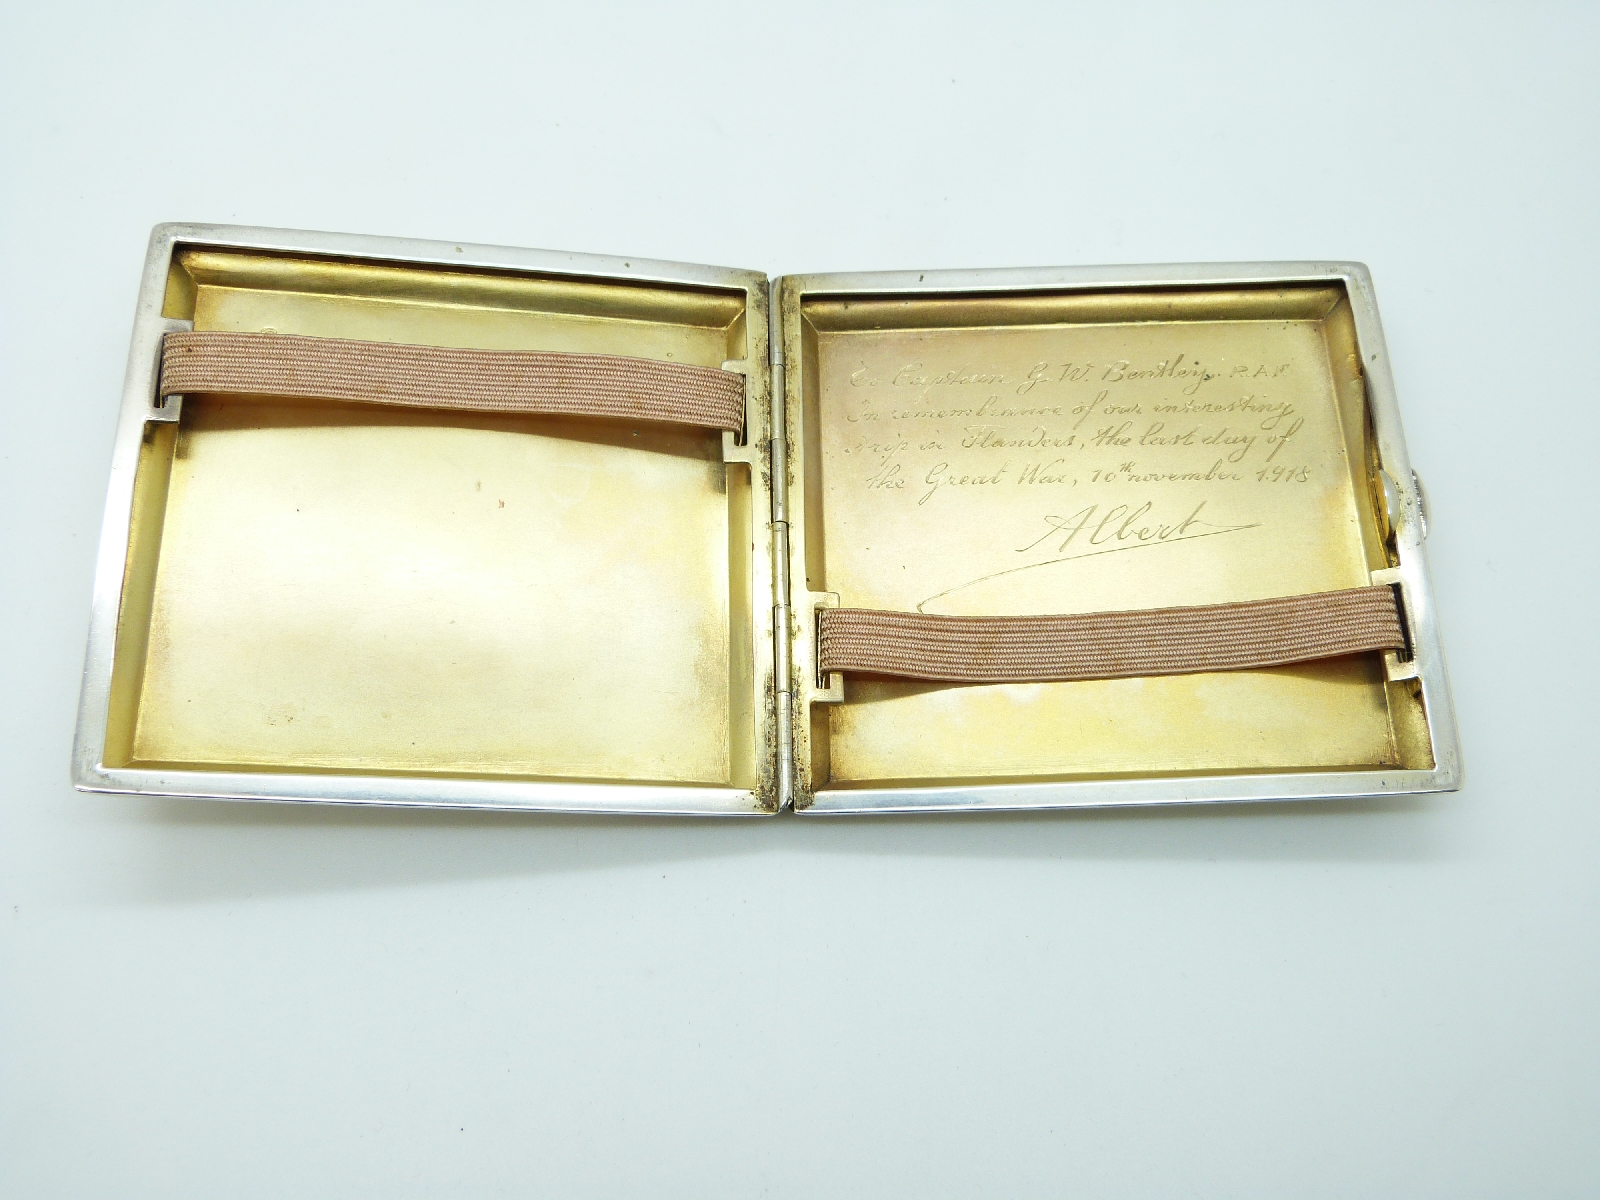 WWI continental silver cigarette case presented to Captain Biles RAF later Bentley by King Albert of - Image 3 of 4